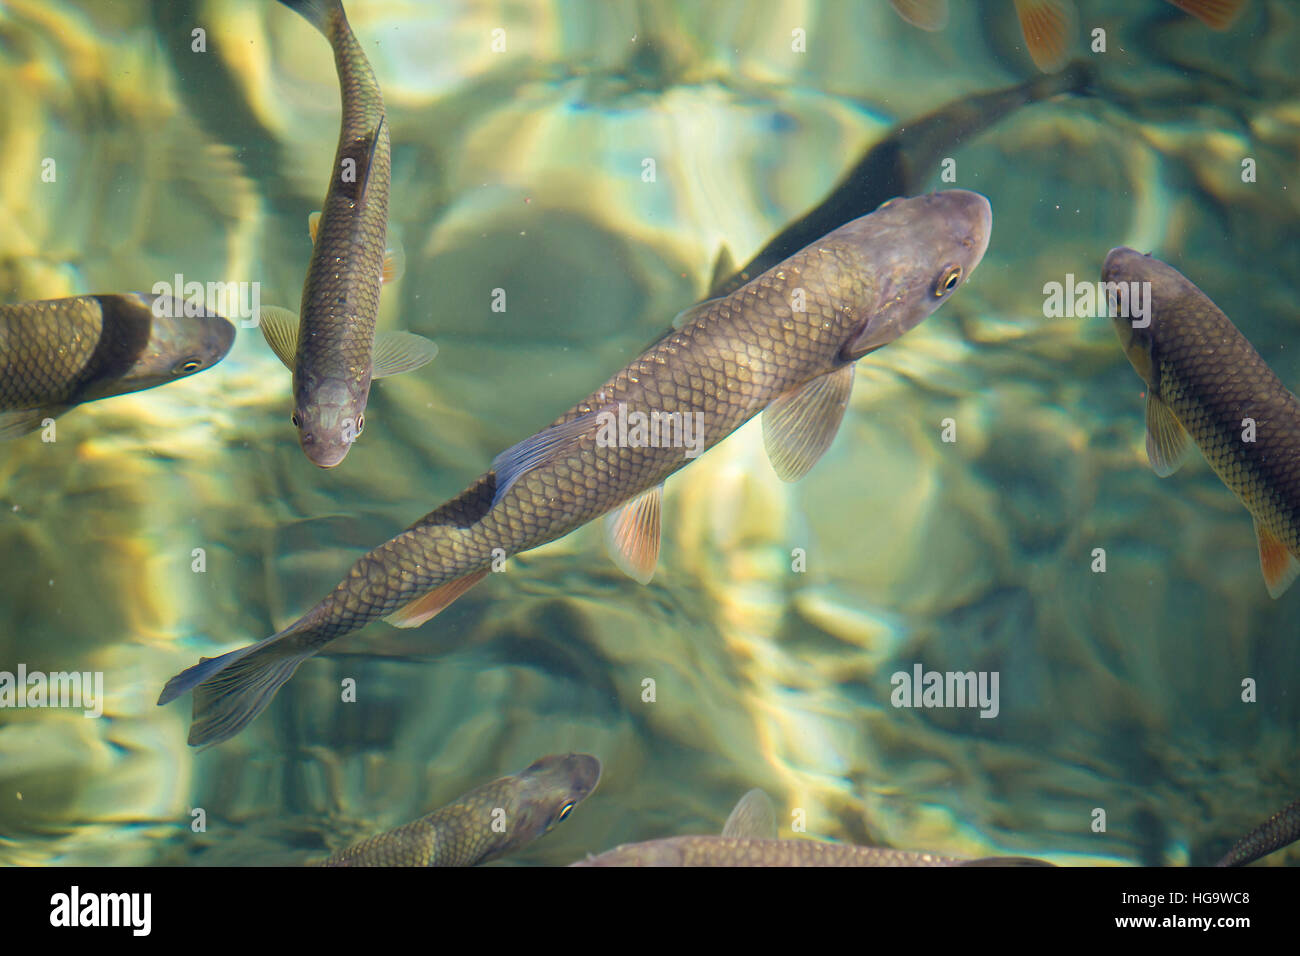 Plitvice lakes national park fish in clean turquoise water Stock Photo